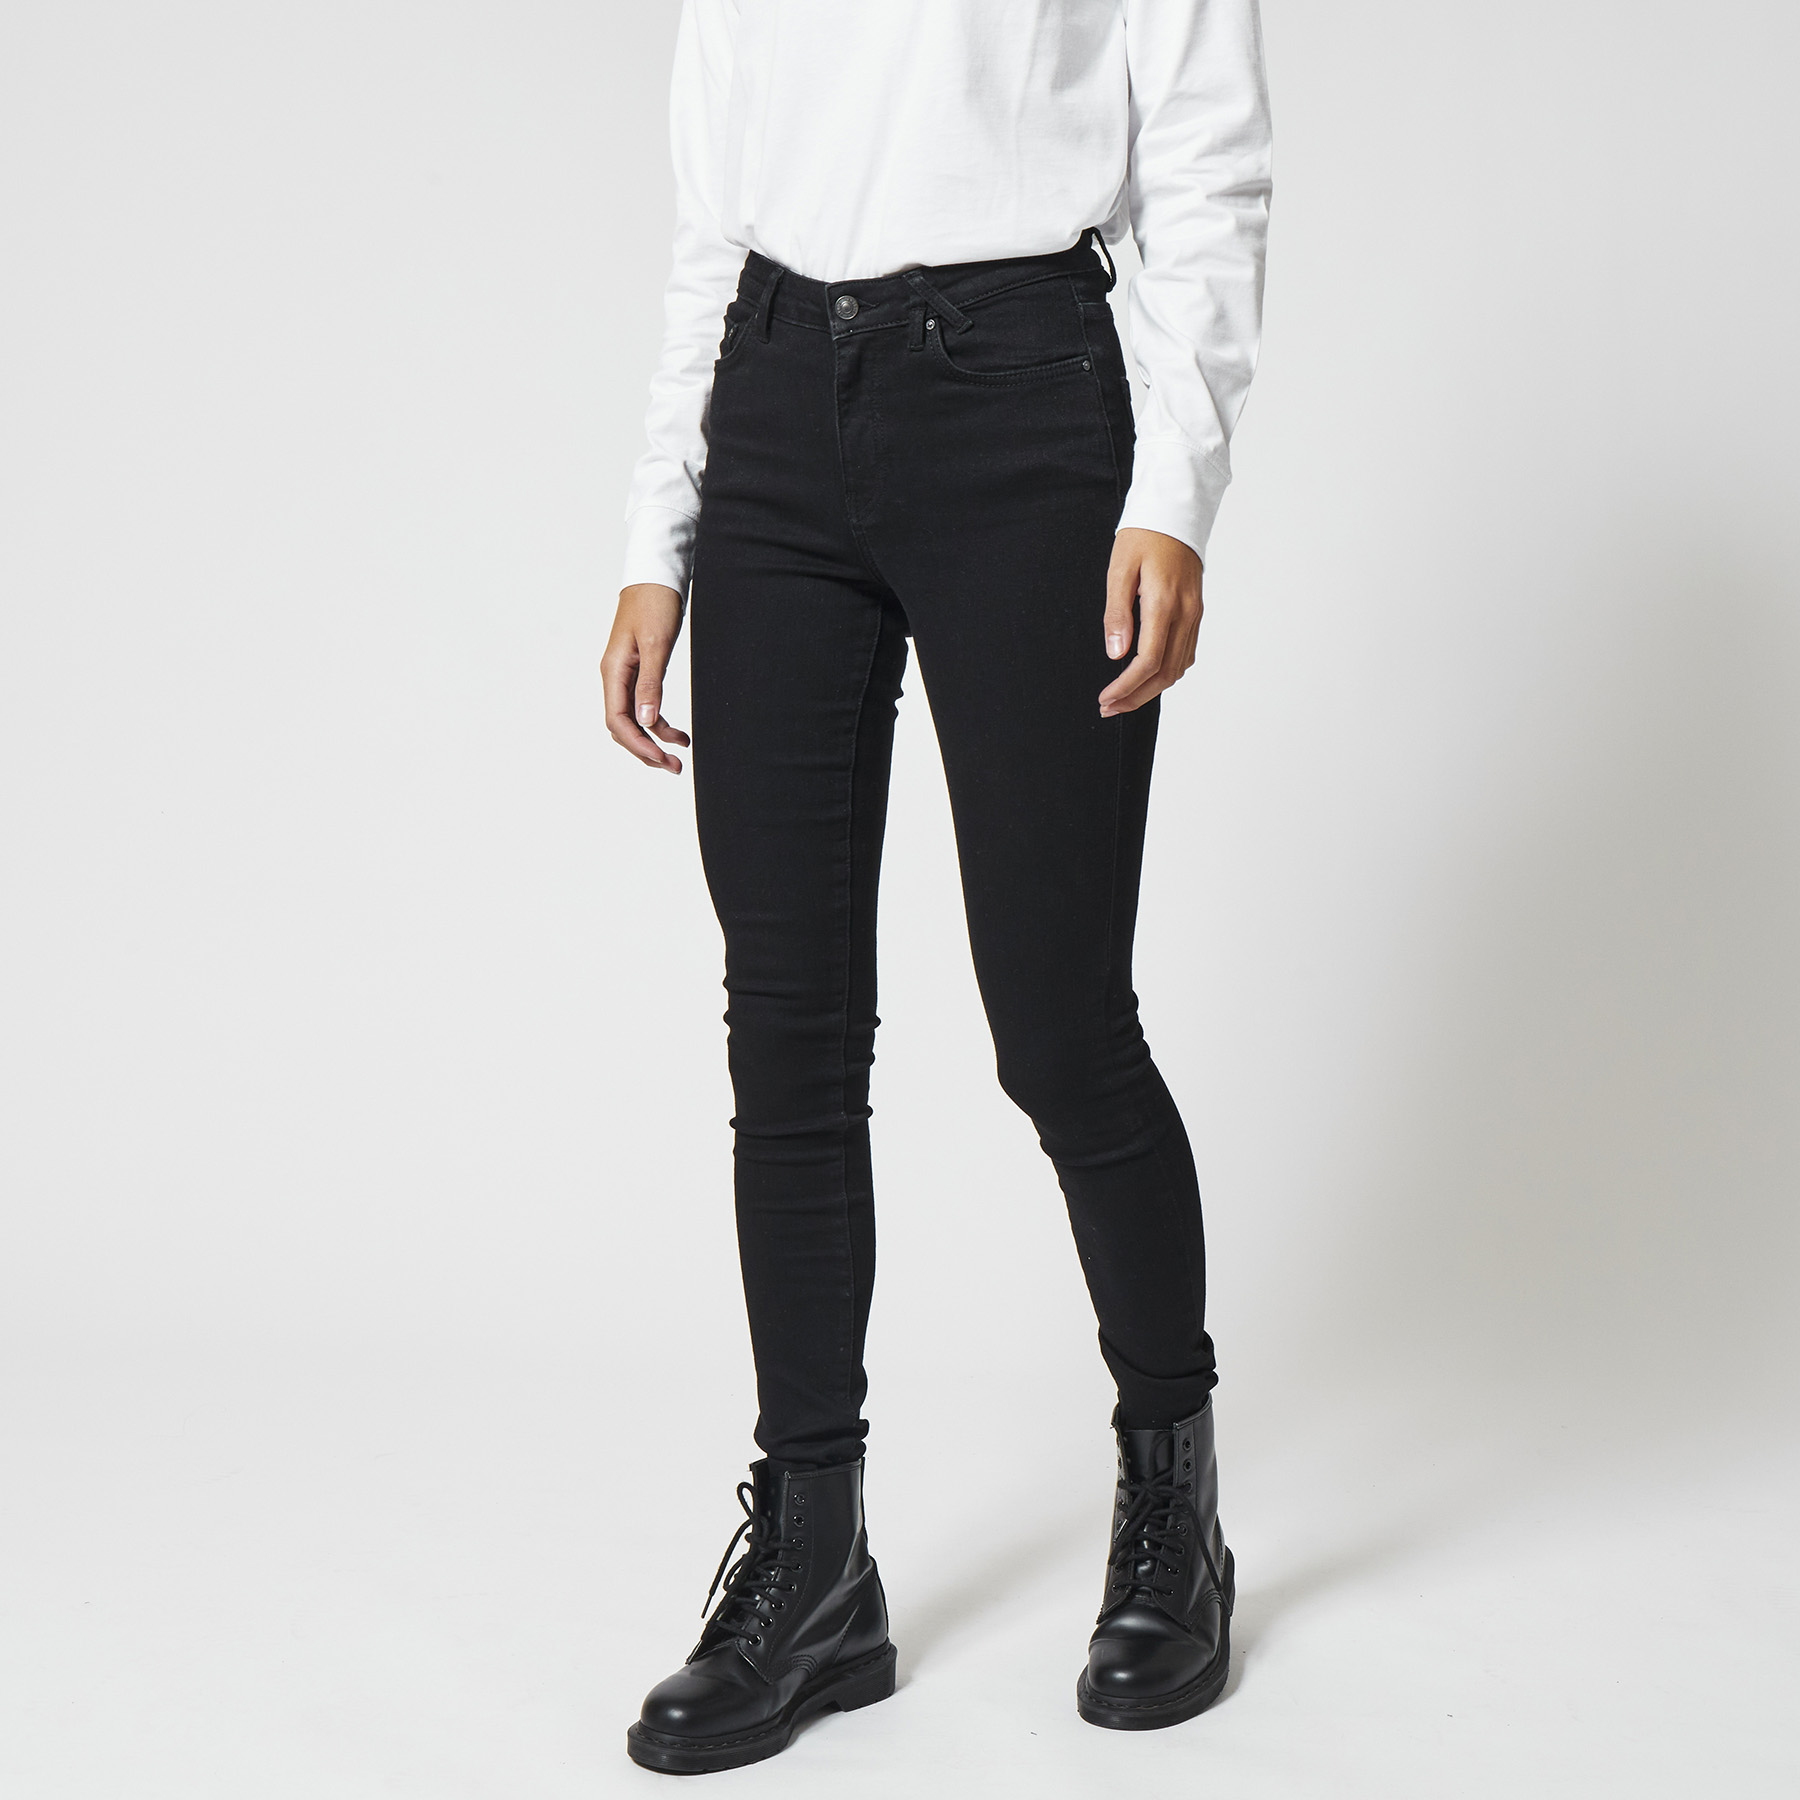 Zwart Wit Jeans Dames Hotsell, SAVE 33% - pacificlanding.ca